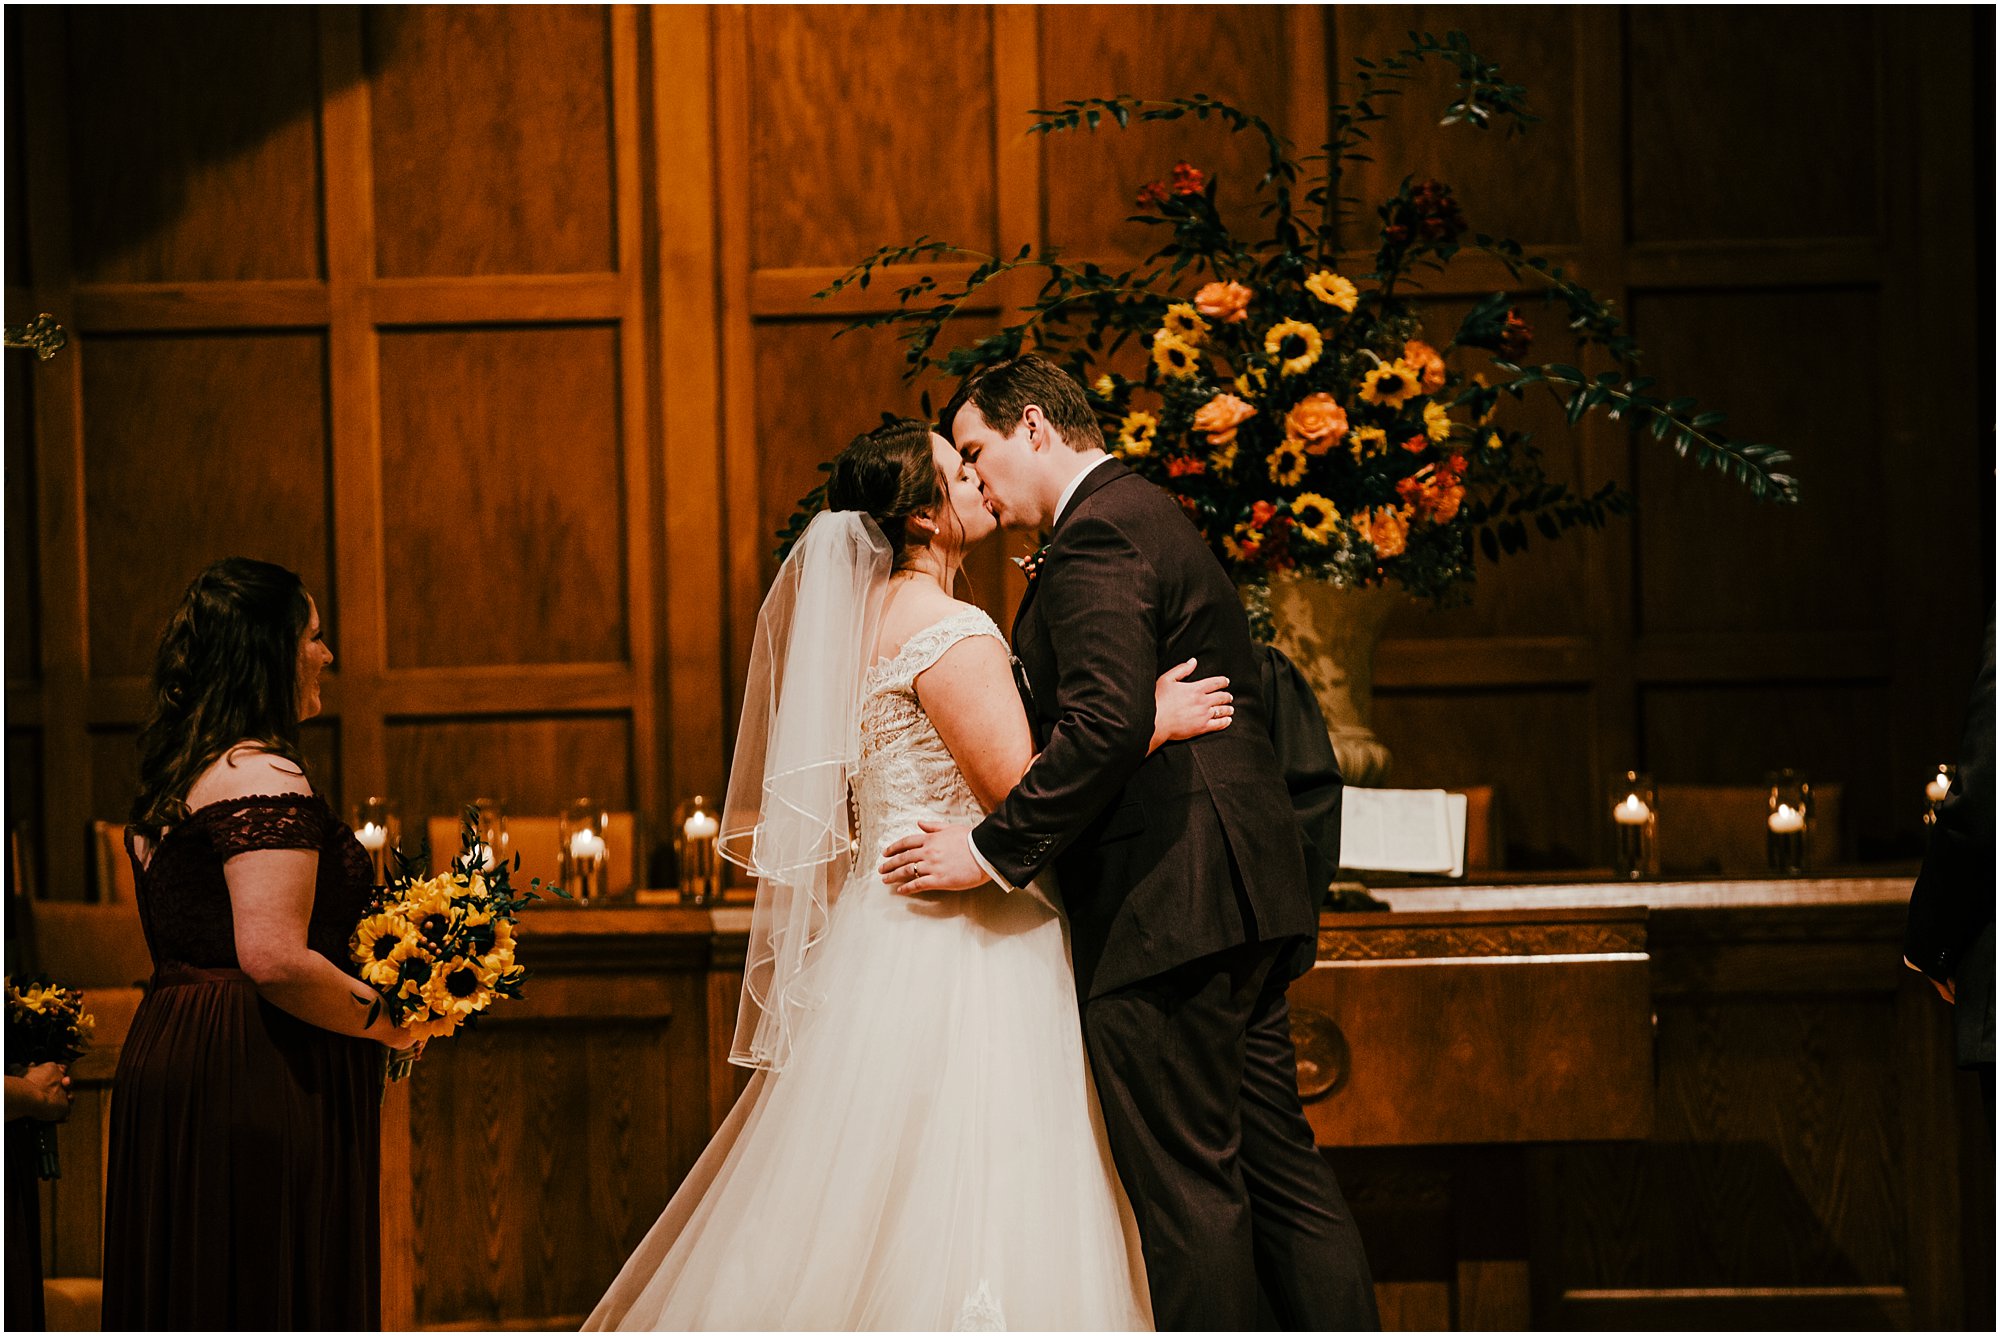 Couple being pronounced as husband and wife and going in for a kiss